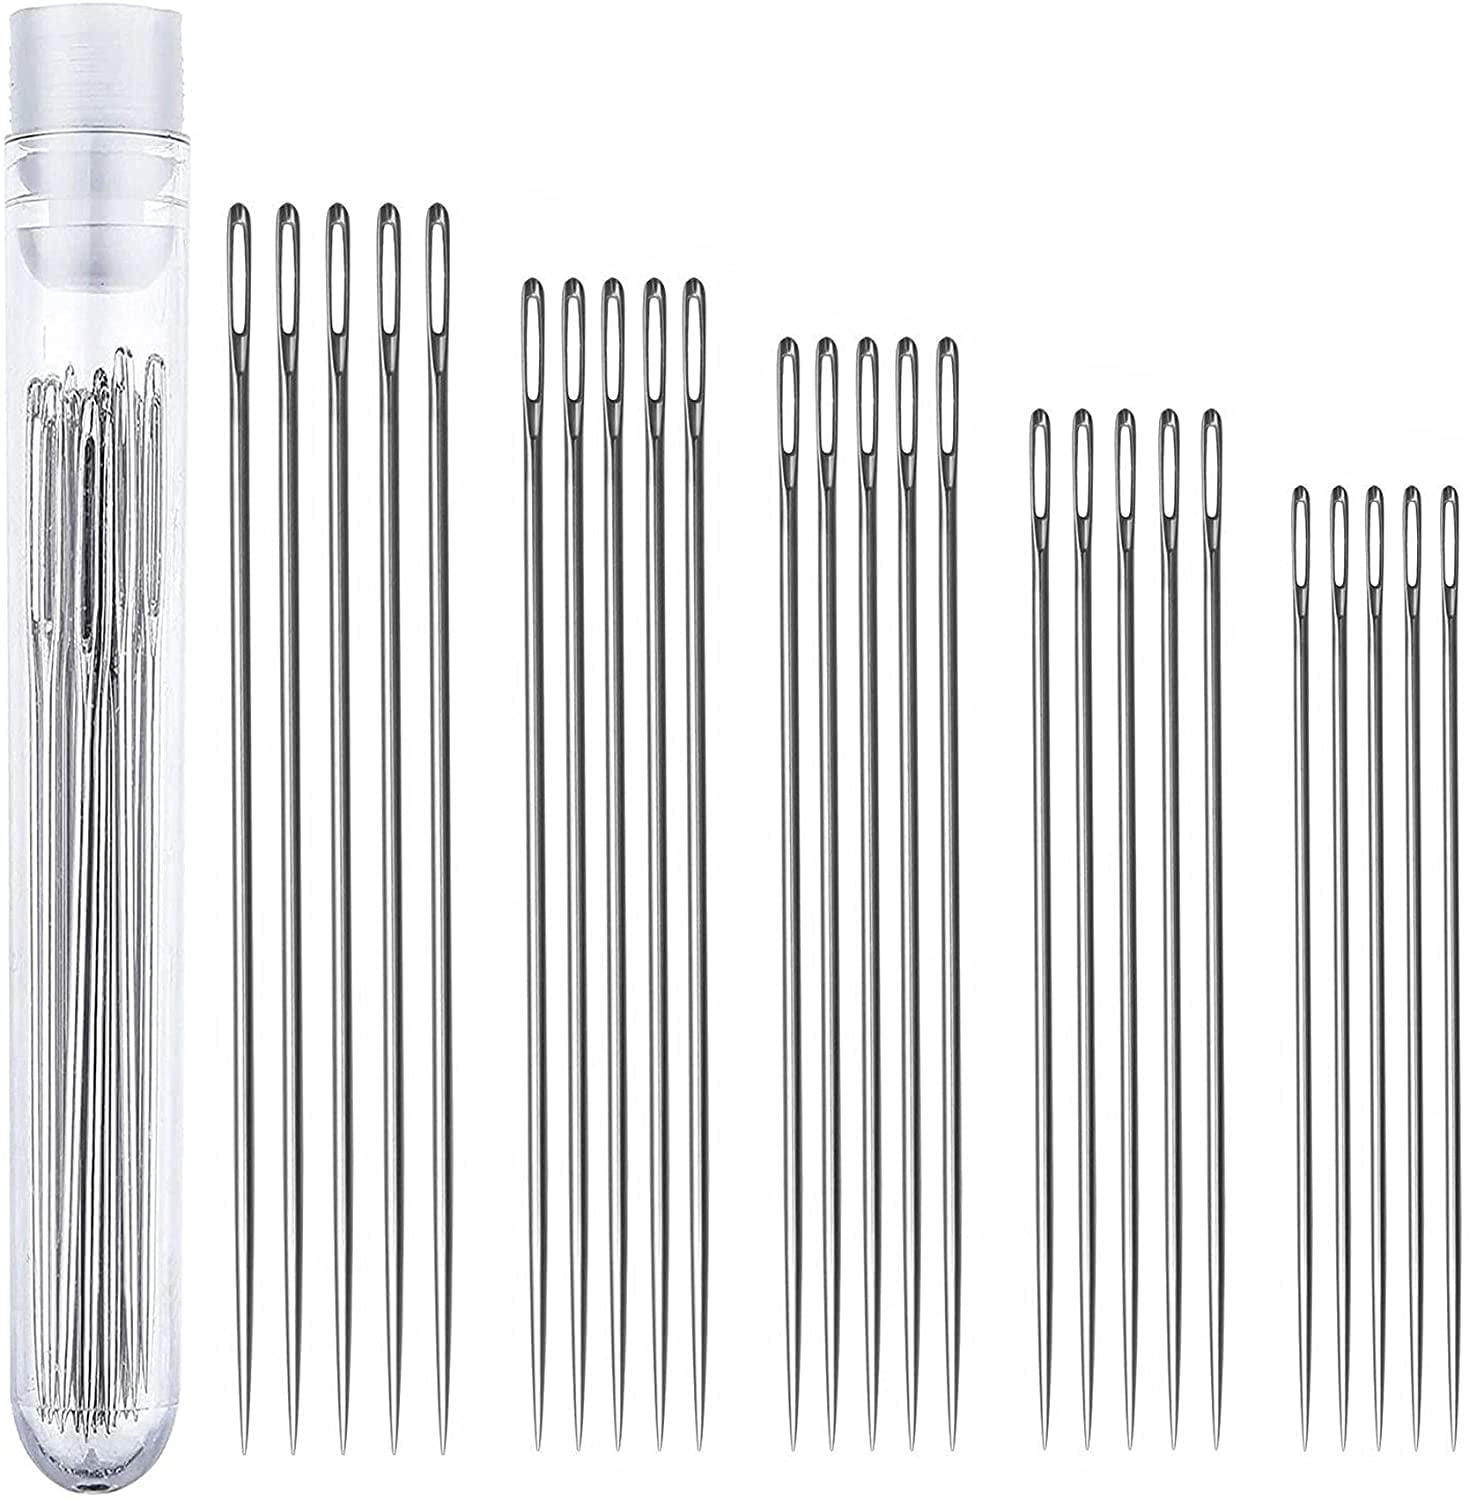 48 Pieces Needles Self Threading Needles Stitching Pins in Assorted Sizes and 60 Pieces Assorted Hand Needles Household Side Embroidery Tool for DIY Needlework Normal Type and Sewing 